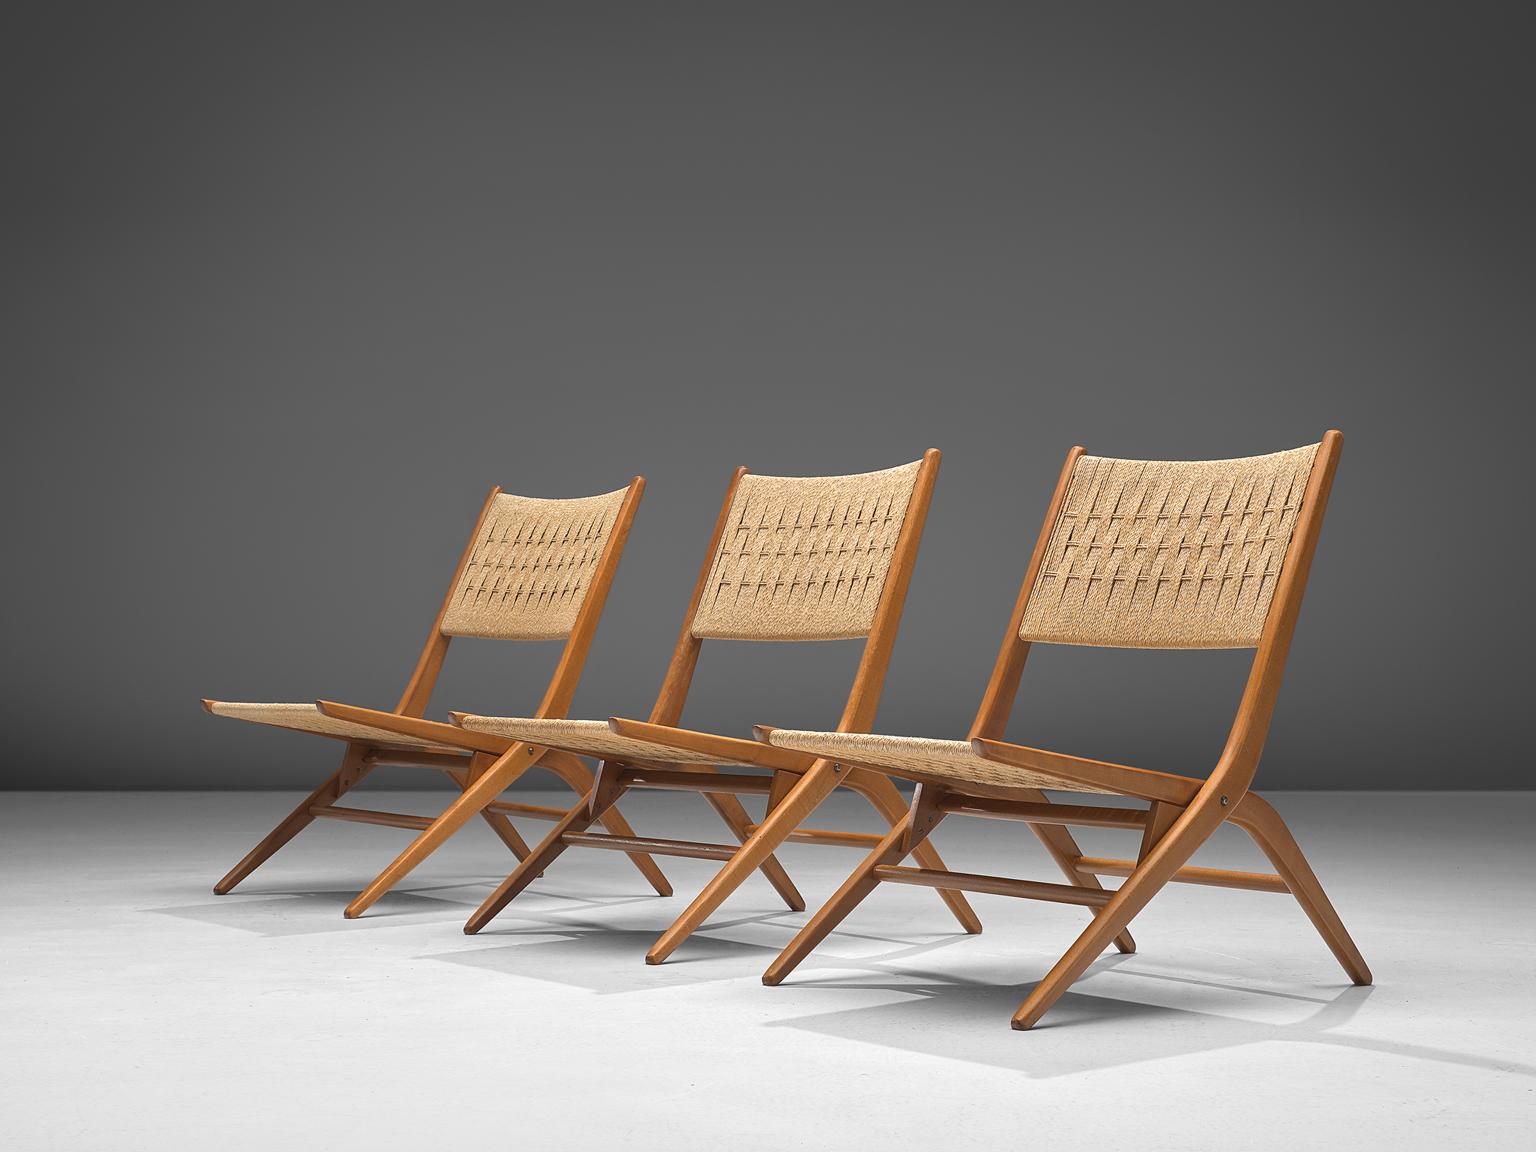 Folding slipper chairs, rope and beech, France, 1960s

Elegant French folding chairs made of beech and rope. The woven wicker shows beautiful graphical details. The beech wooden frame is designed with high attention to detail as seen in the